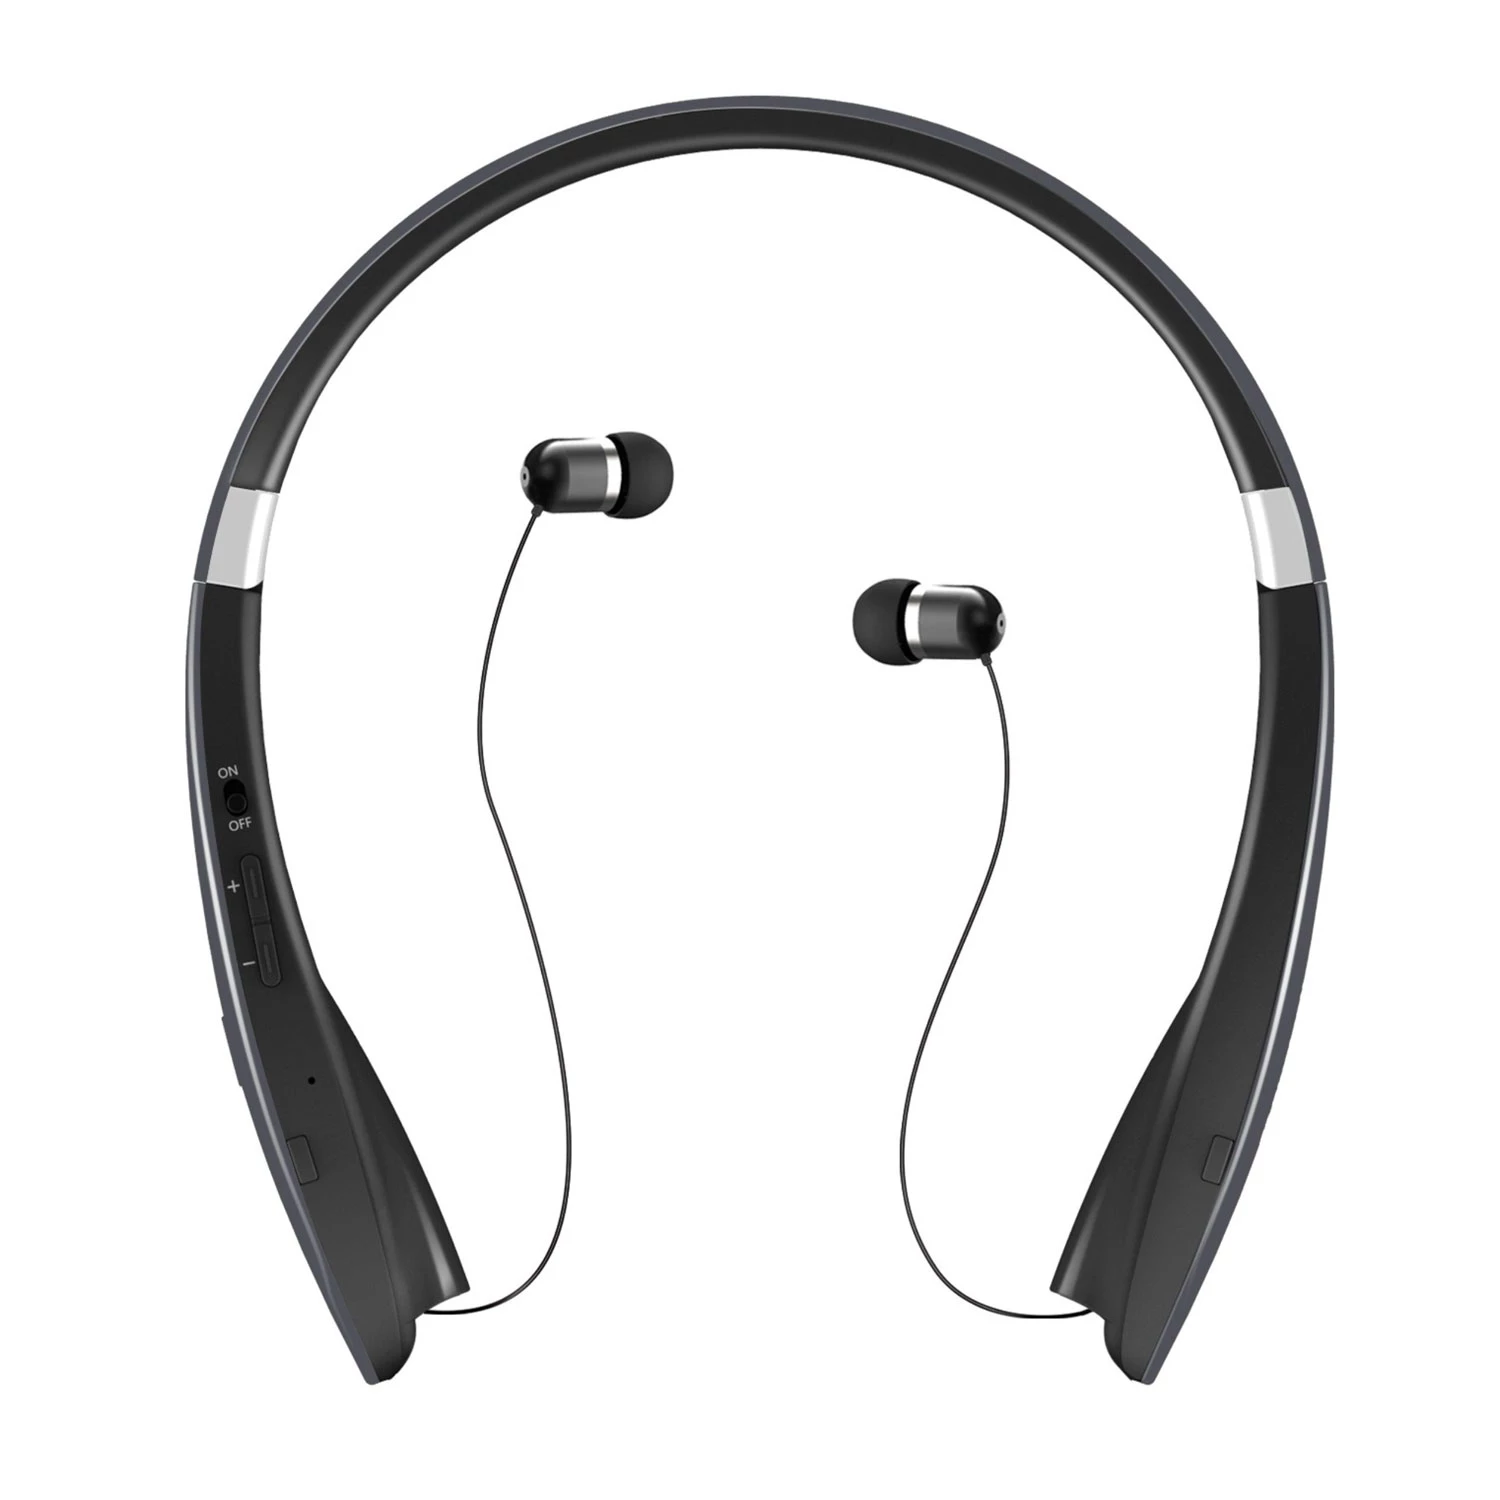 Foldable Wireless Headsets - 4.1 Sport Neckband Stereo Headphones with Mic - Sweatproof Earbuds for 